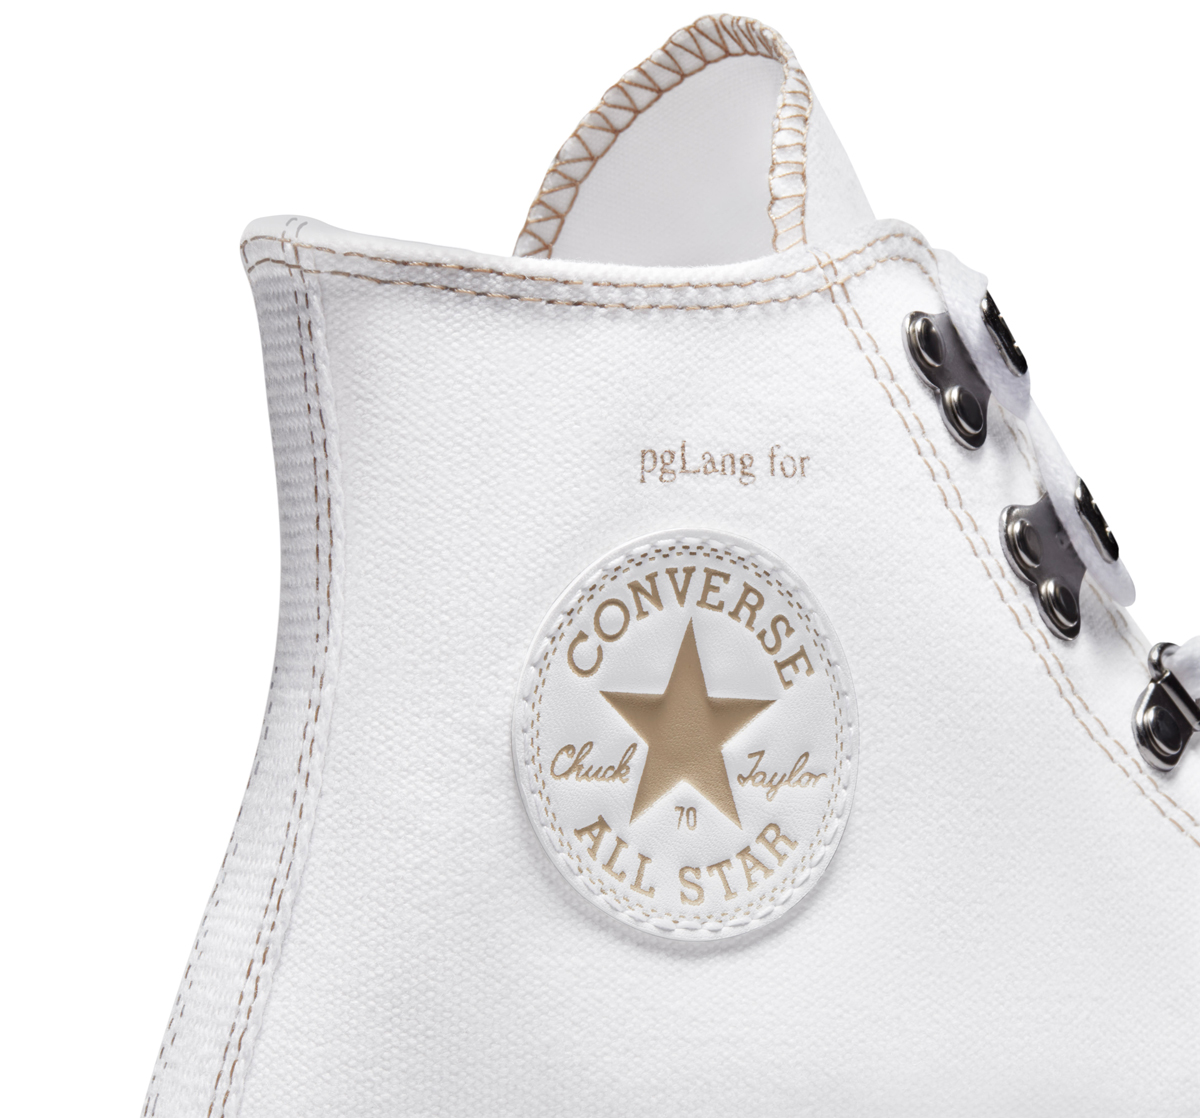 pgLang x Converse Chuck 70 & Pro Leather Collab, Release Details